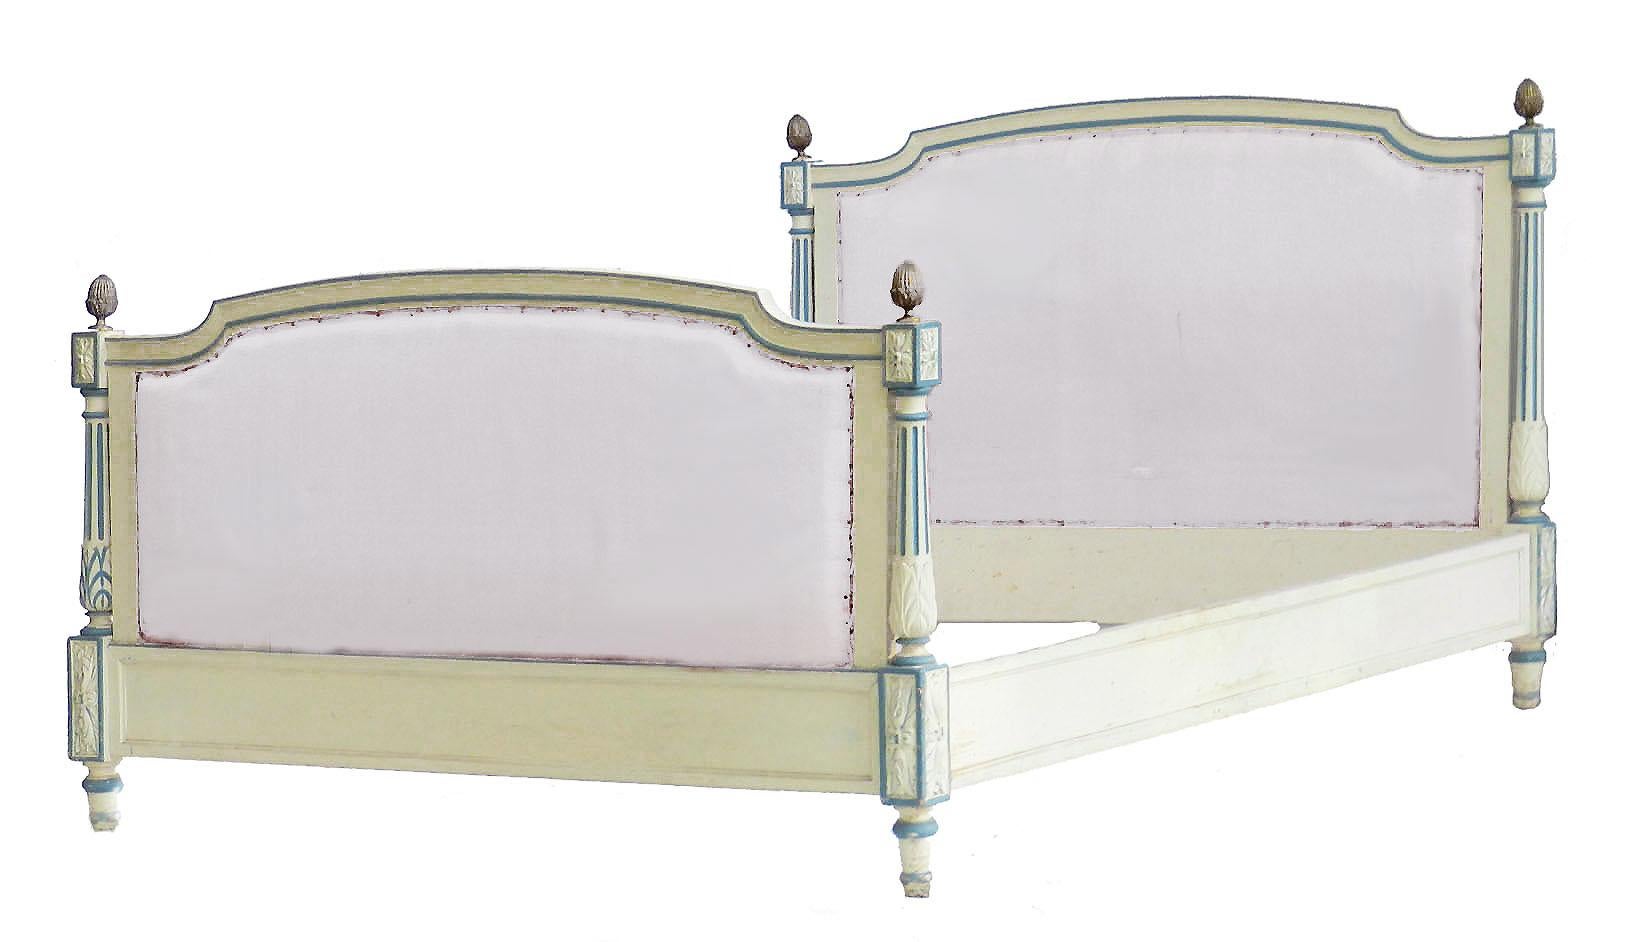 Antique French Bed US Queen UK King size Louis XVI revival recover customize (Louis XVI.)